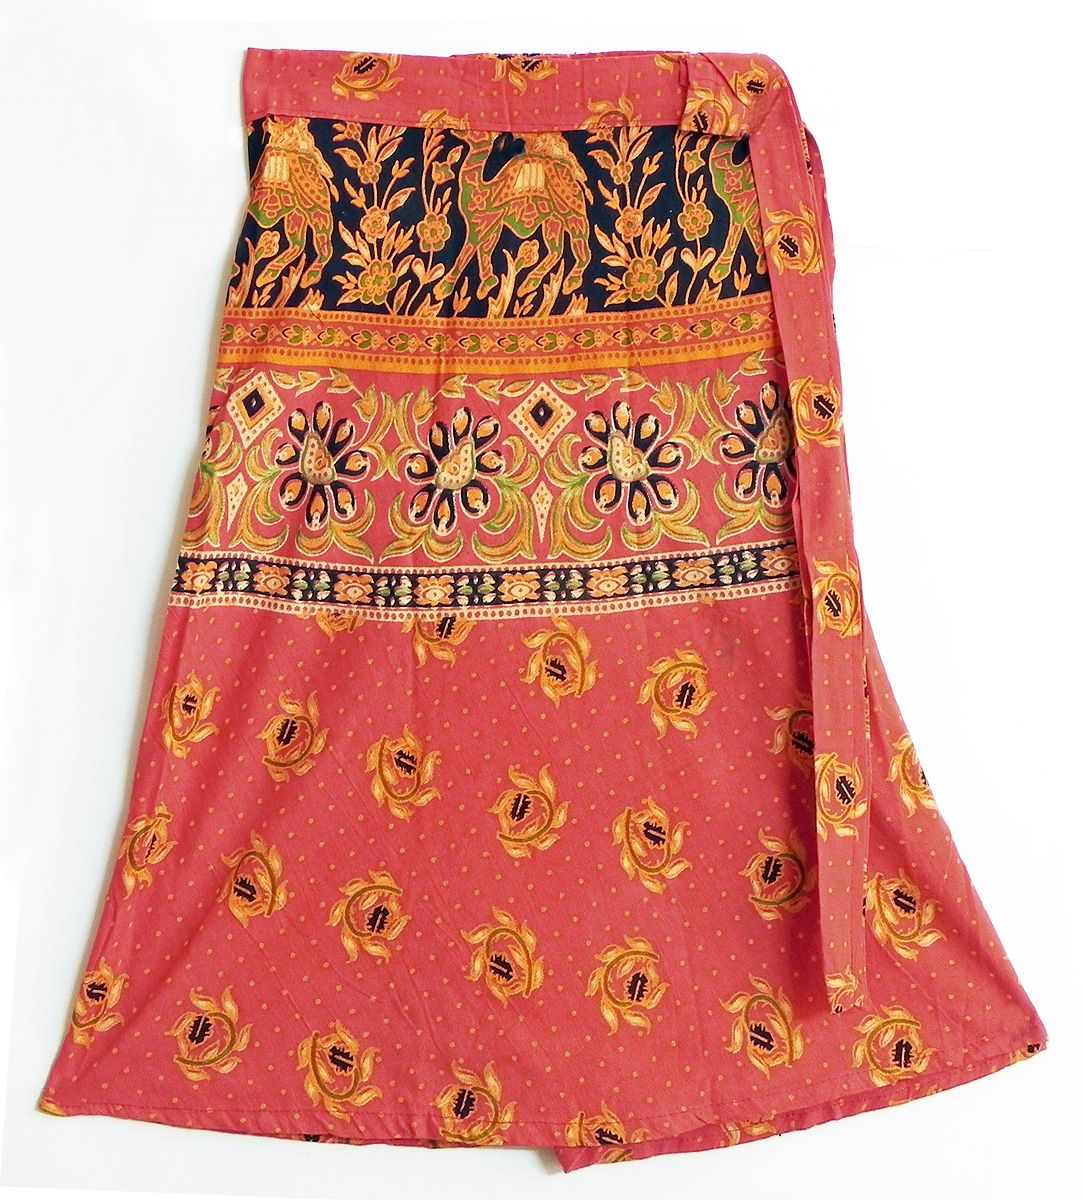 Saffron, Green and Black Flower and Camel Print on Knee Length Red Wrap ...